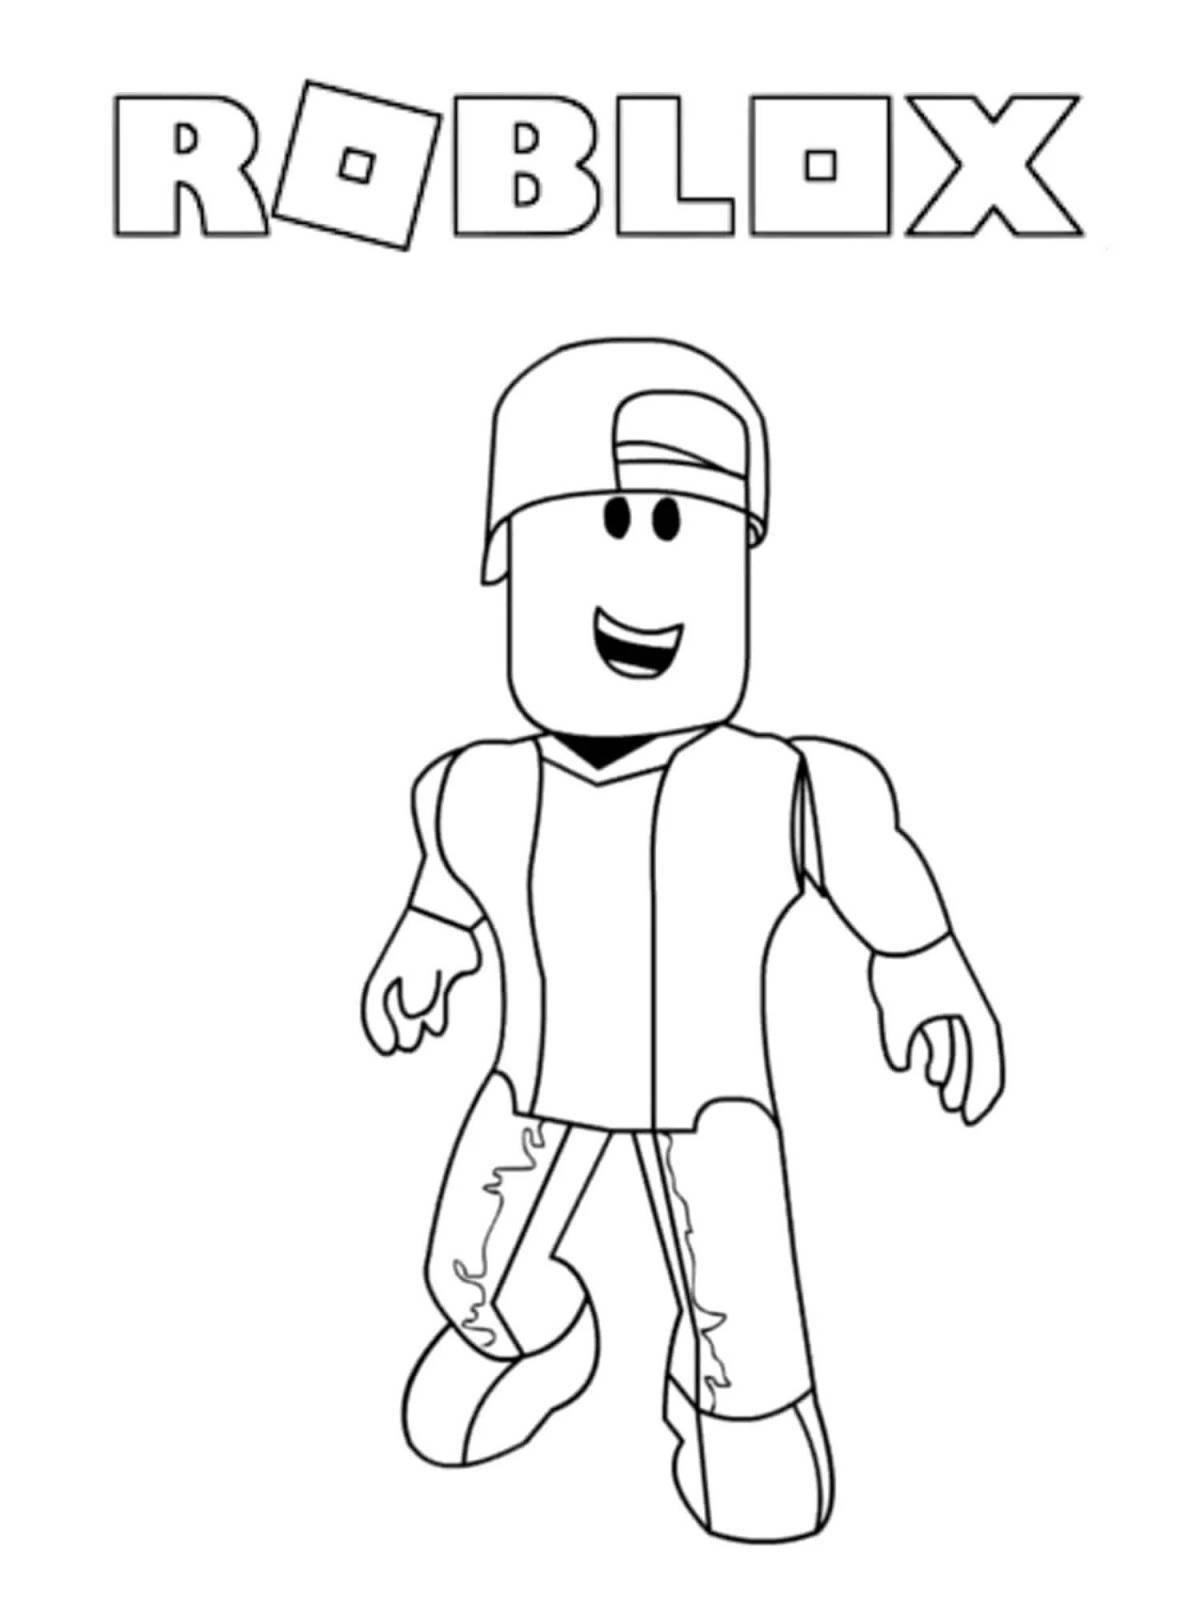 Exciting roblox face coloring page